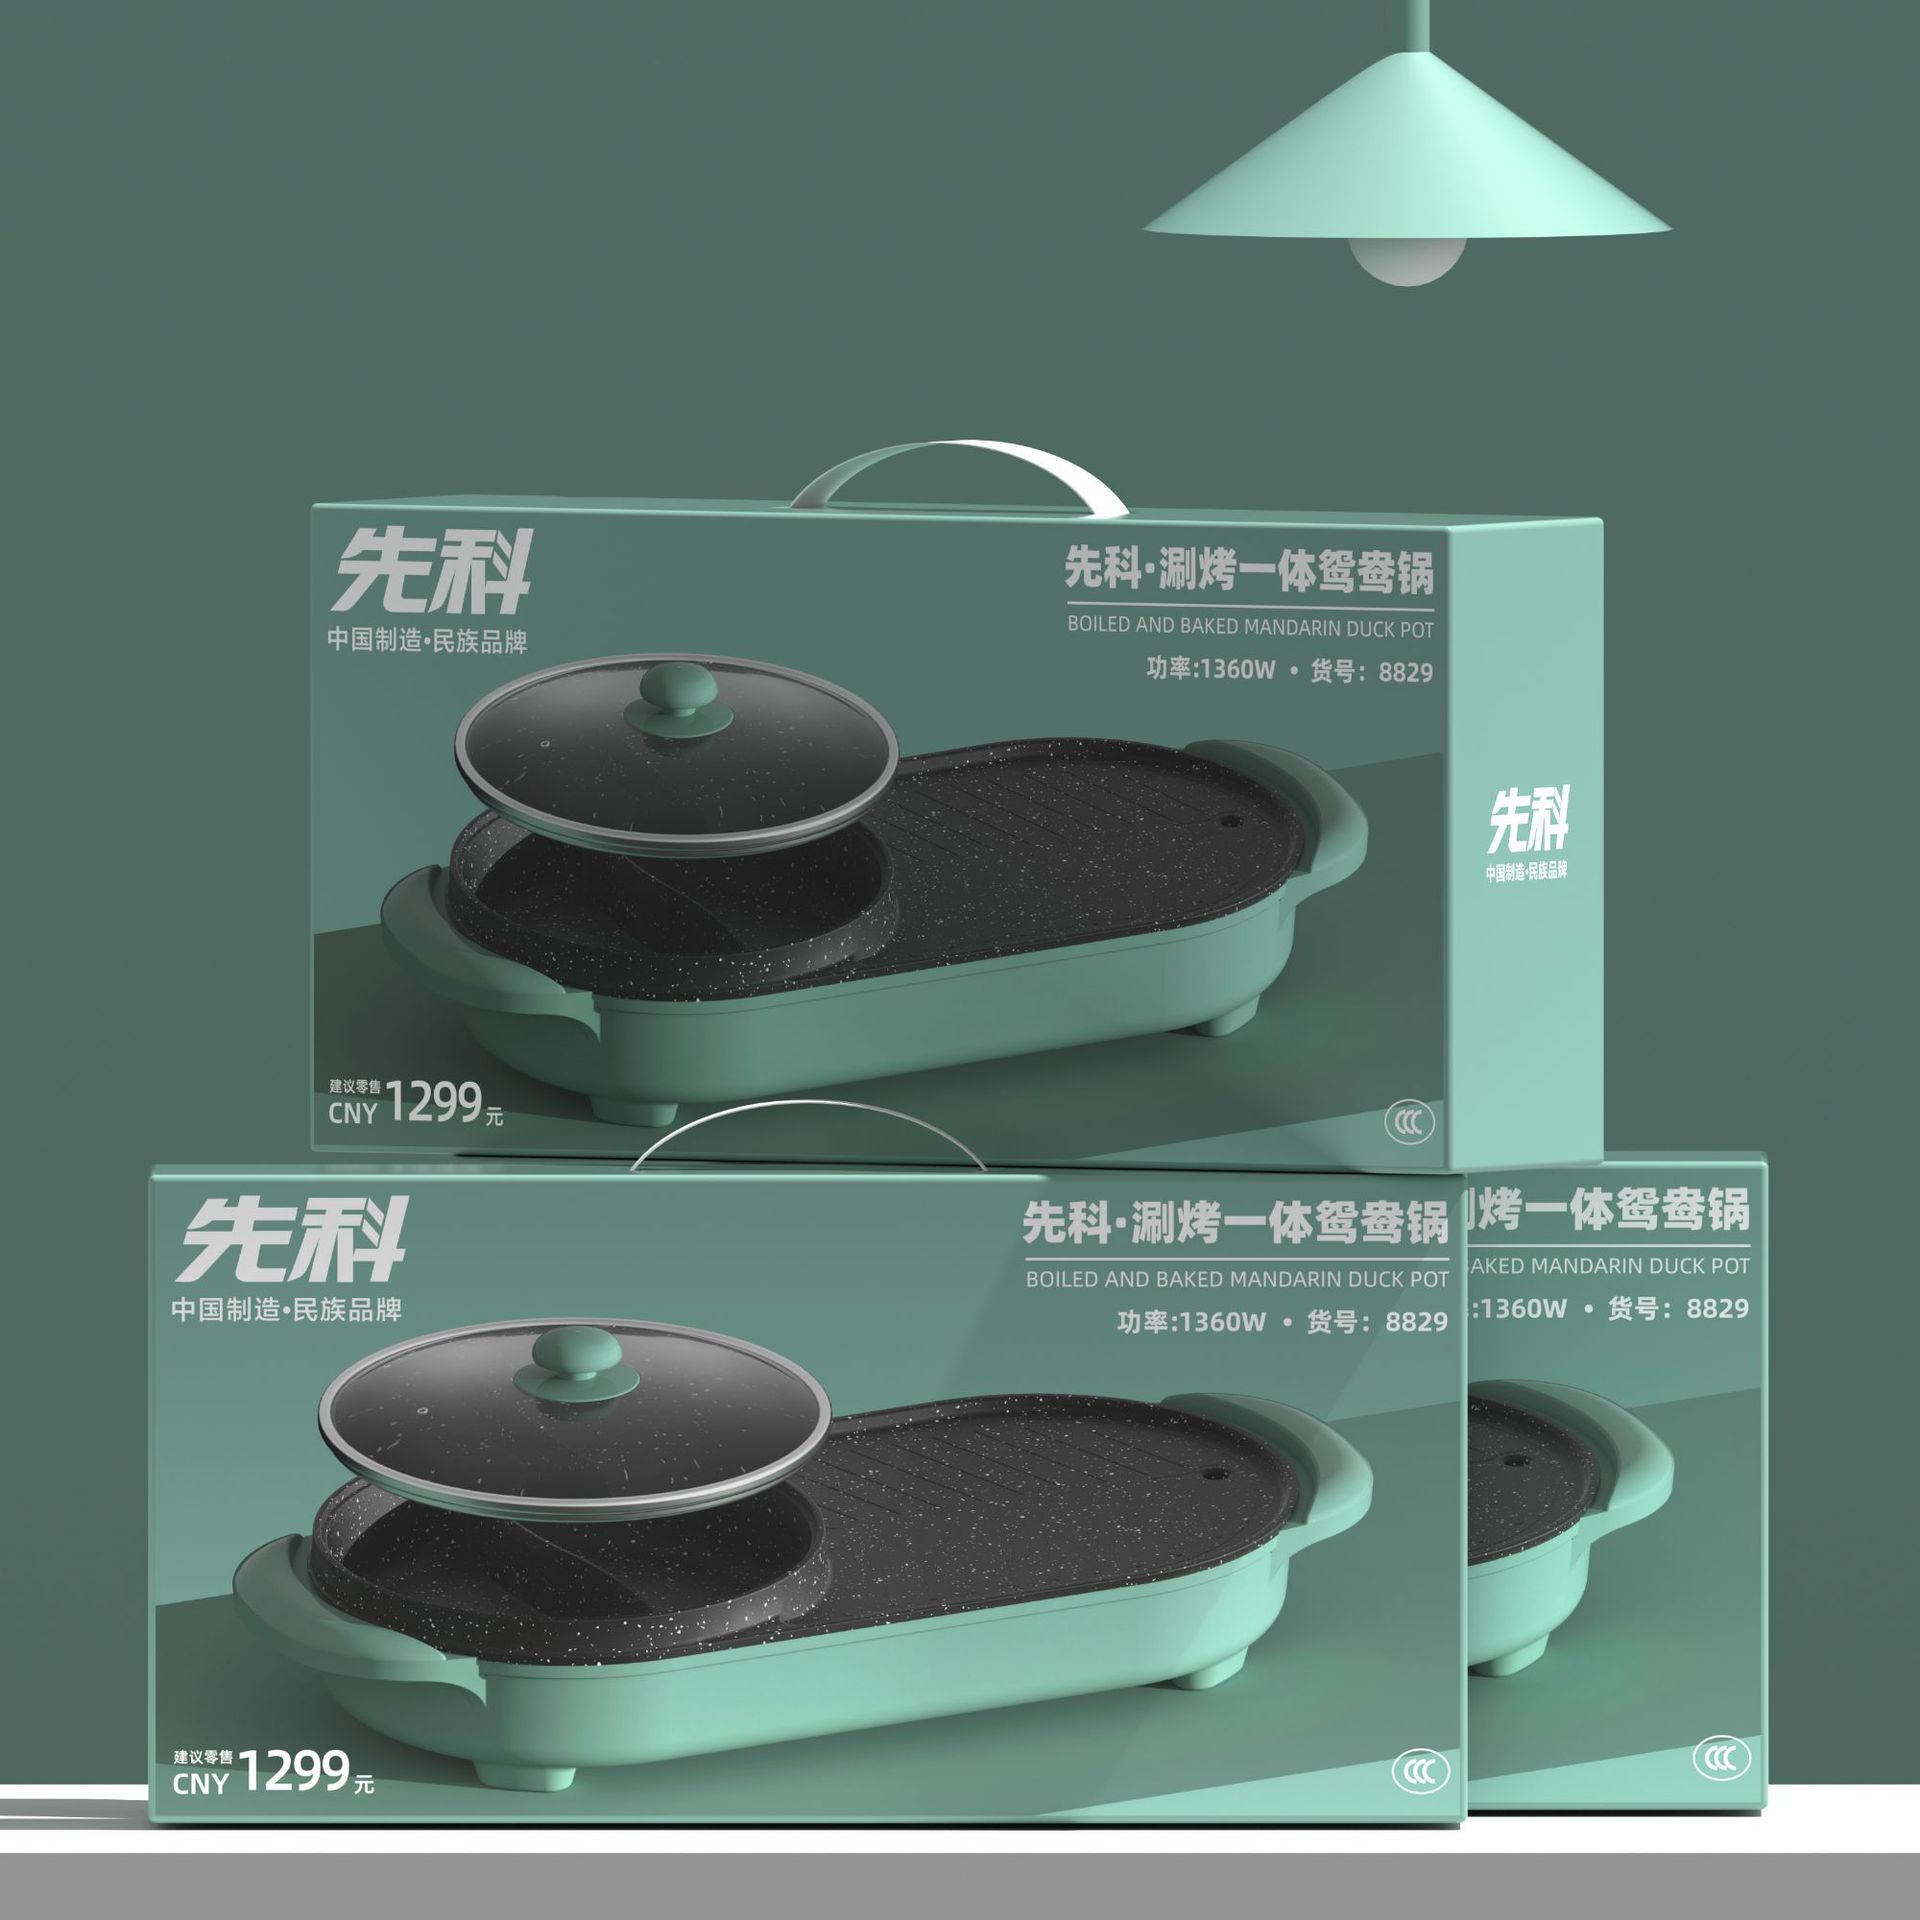 [Activity Gift] SAST Mandarin Duck Washing and Baking All-in-One Rectangular Electric Heat Pan Baking Tray Frying Pan Electric Chafing Dish Wholesale